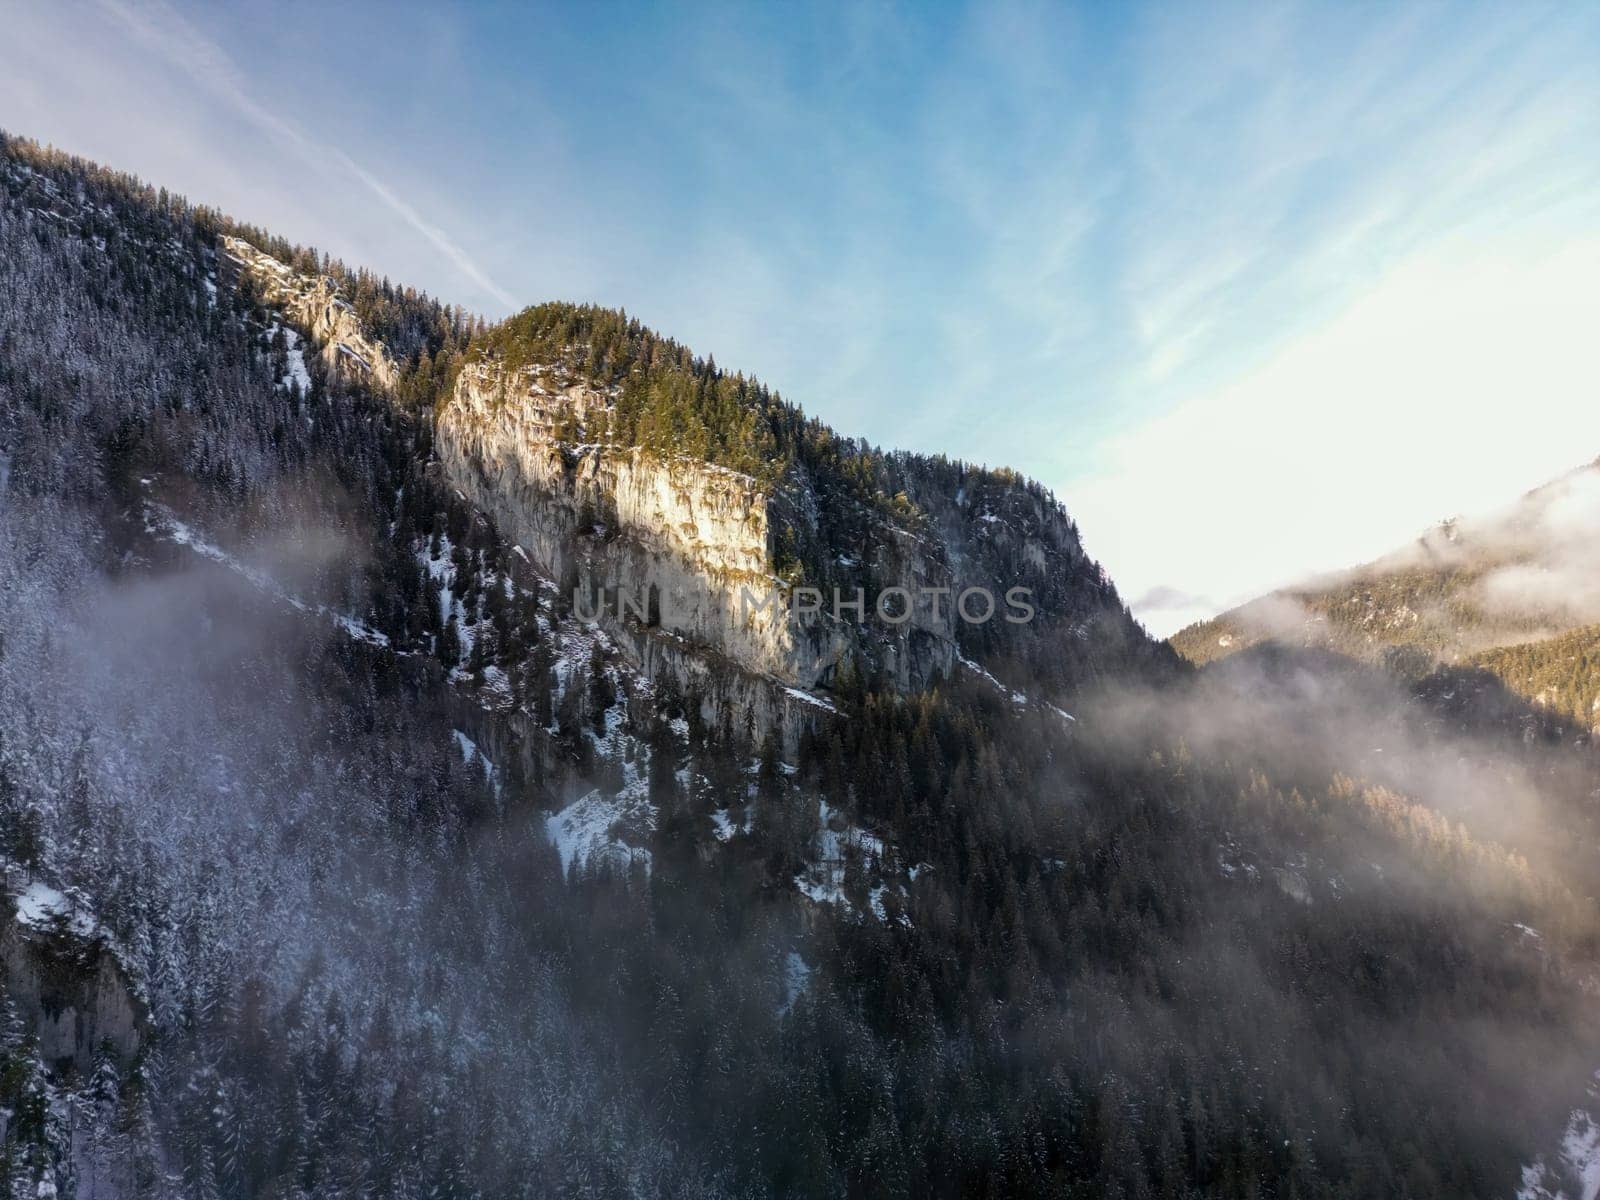 Aerial view of misty pine forest on winter Low Tatras mountain slope in Slovakia. Morning or evening beautiful birds eye scenery with frozen fir trees in snow, panoramic foggy rocky landscape